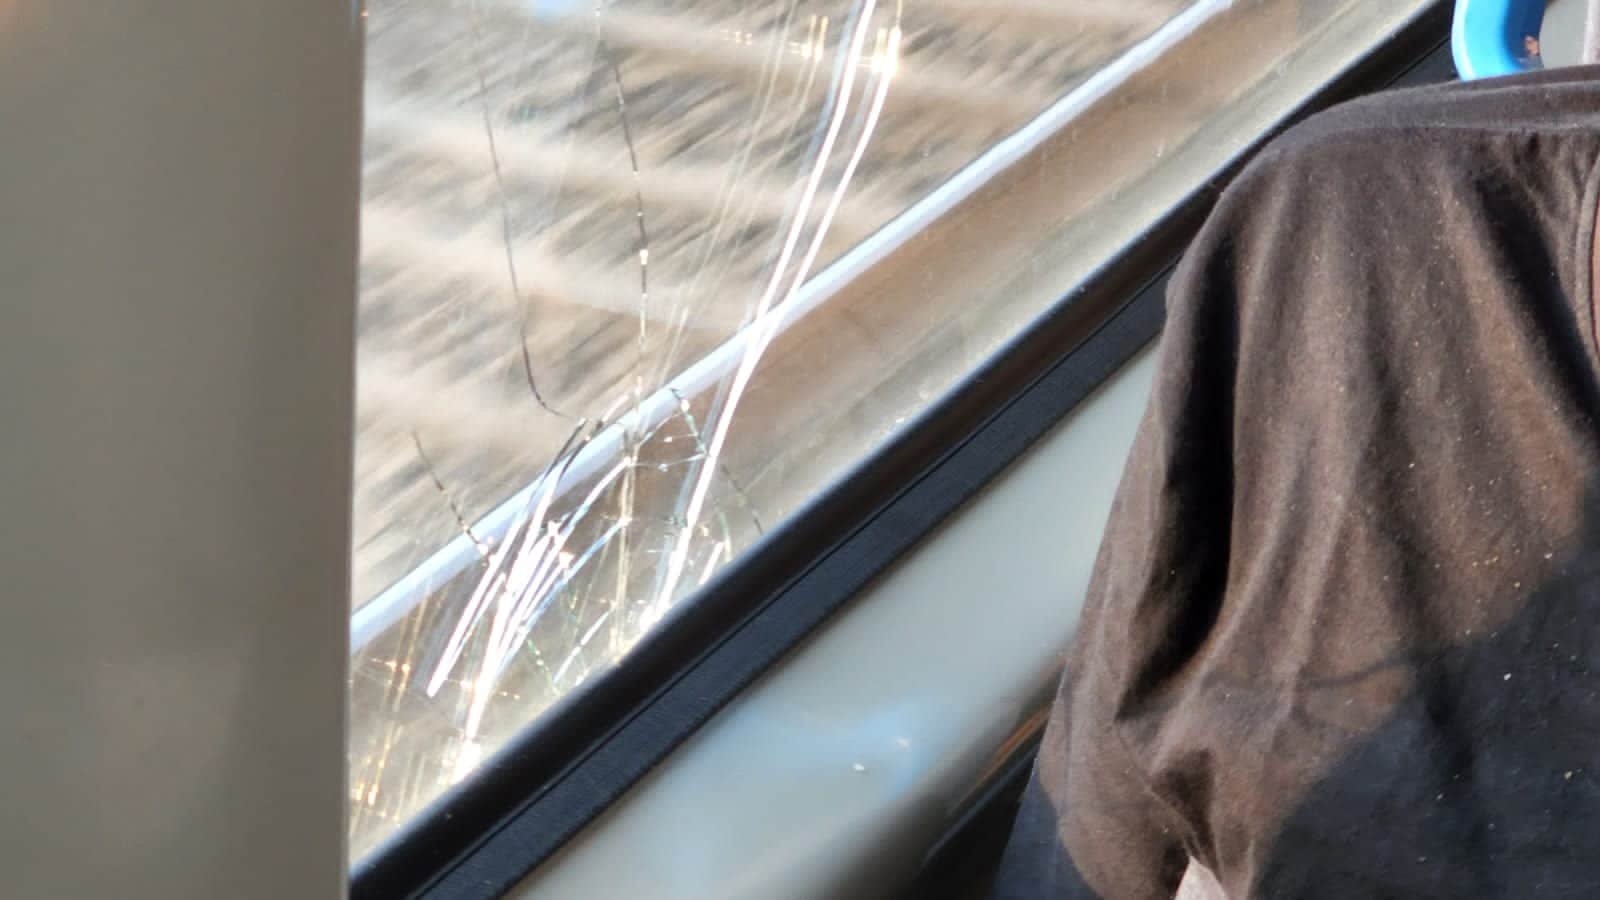 gujarat-election-heats-up-asaduddin-owaisi-attacked-in-train-stone-pelted-on-train-going-from-ahmedabad-to-surat